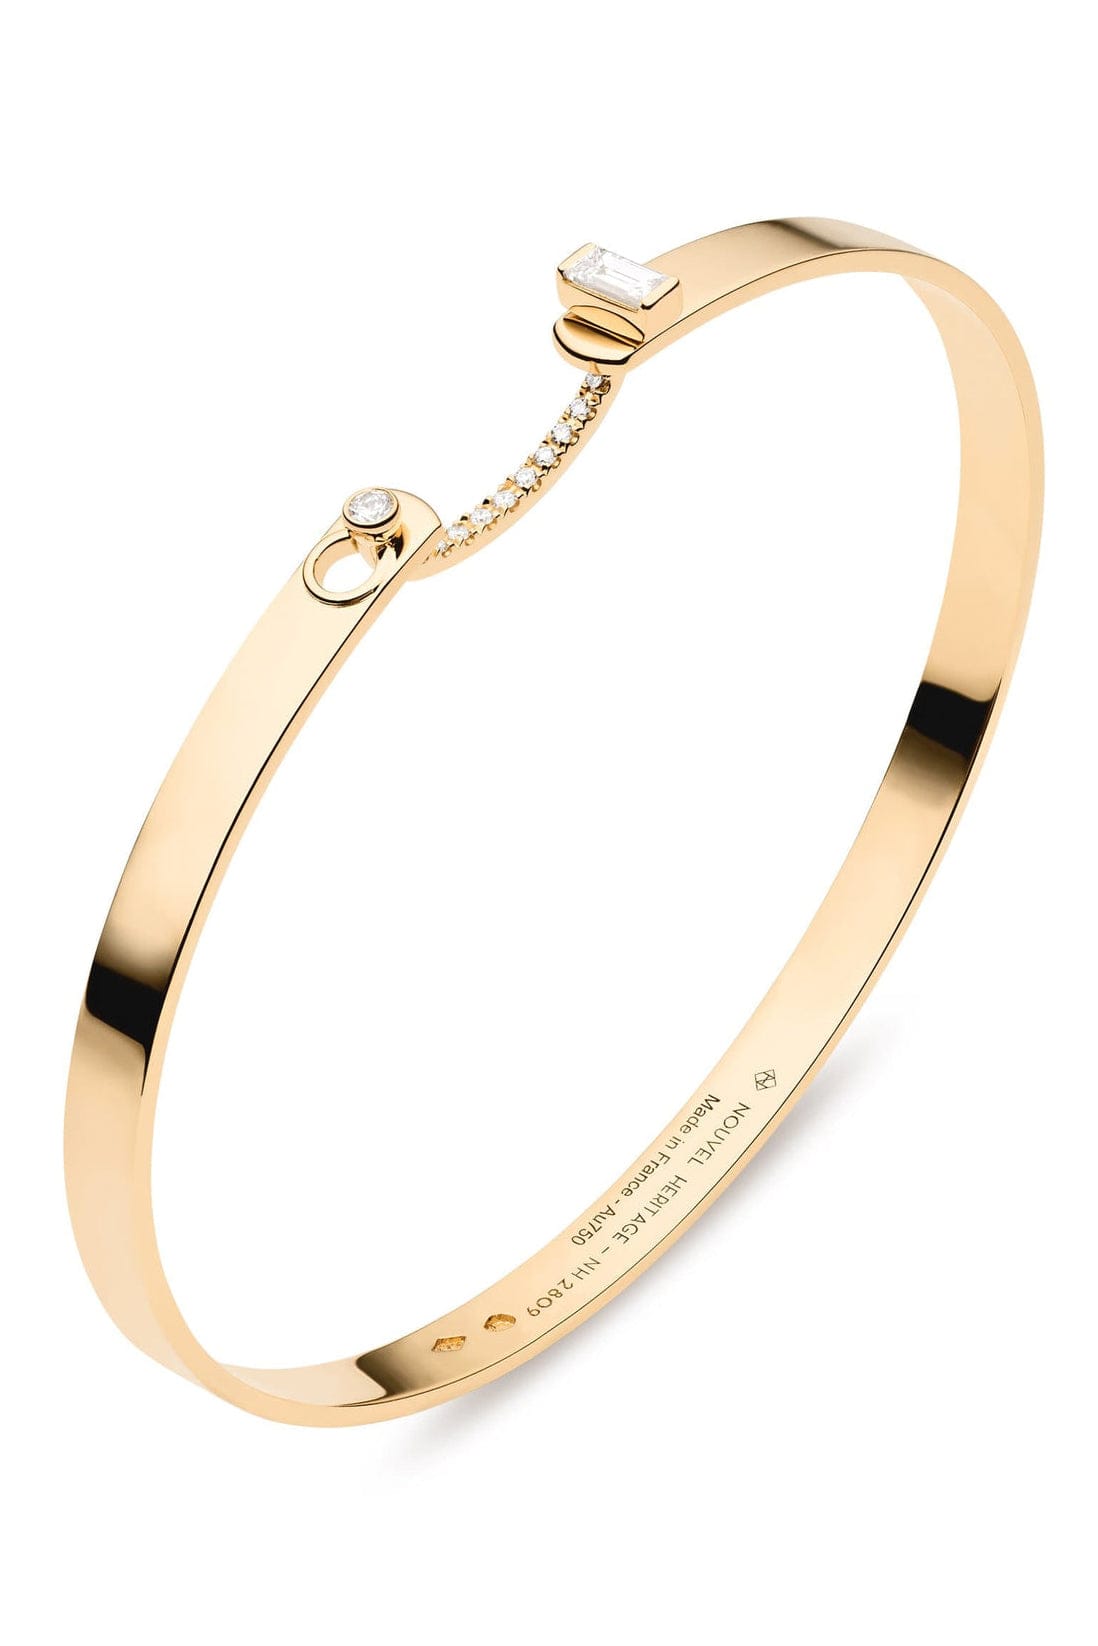 NOUVEL HERITAGE-Dinner Date Mood Bangle-YELLOW GOLD